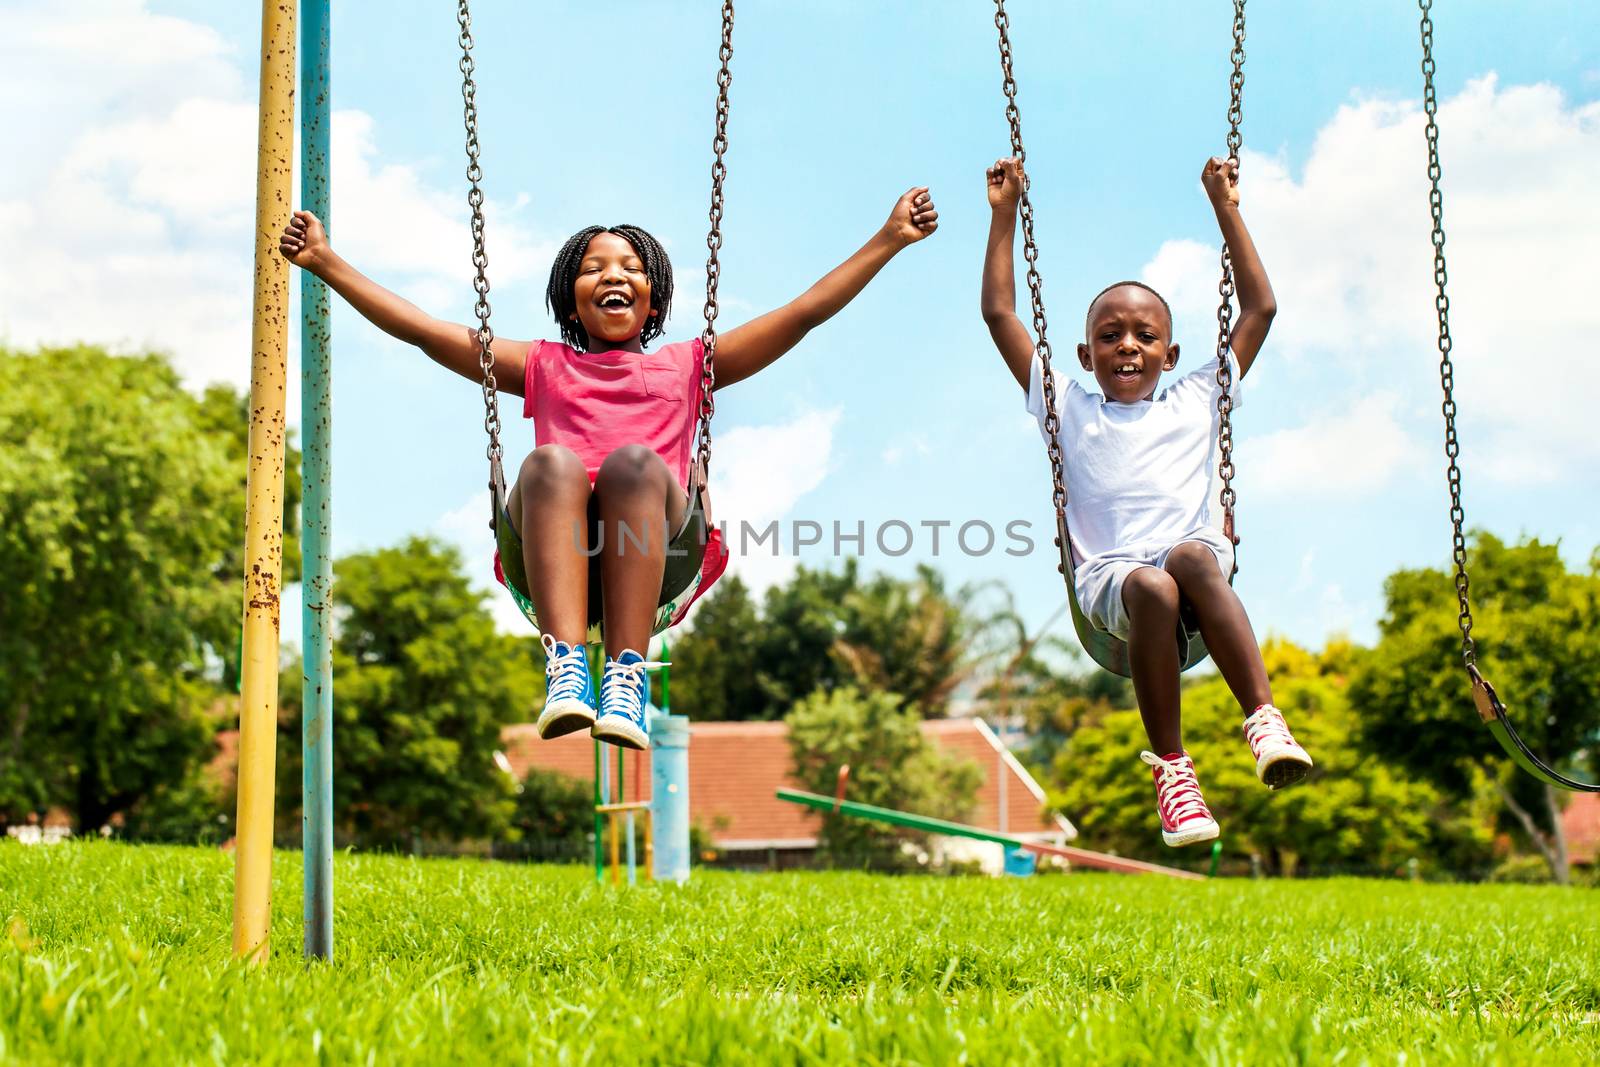 Action portrait of shouting African kids playing on swing in neighborhood.Out of focus houses in background.